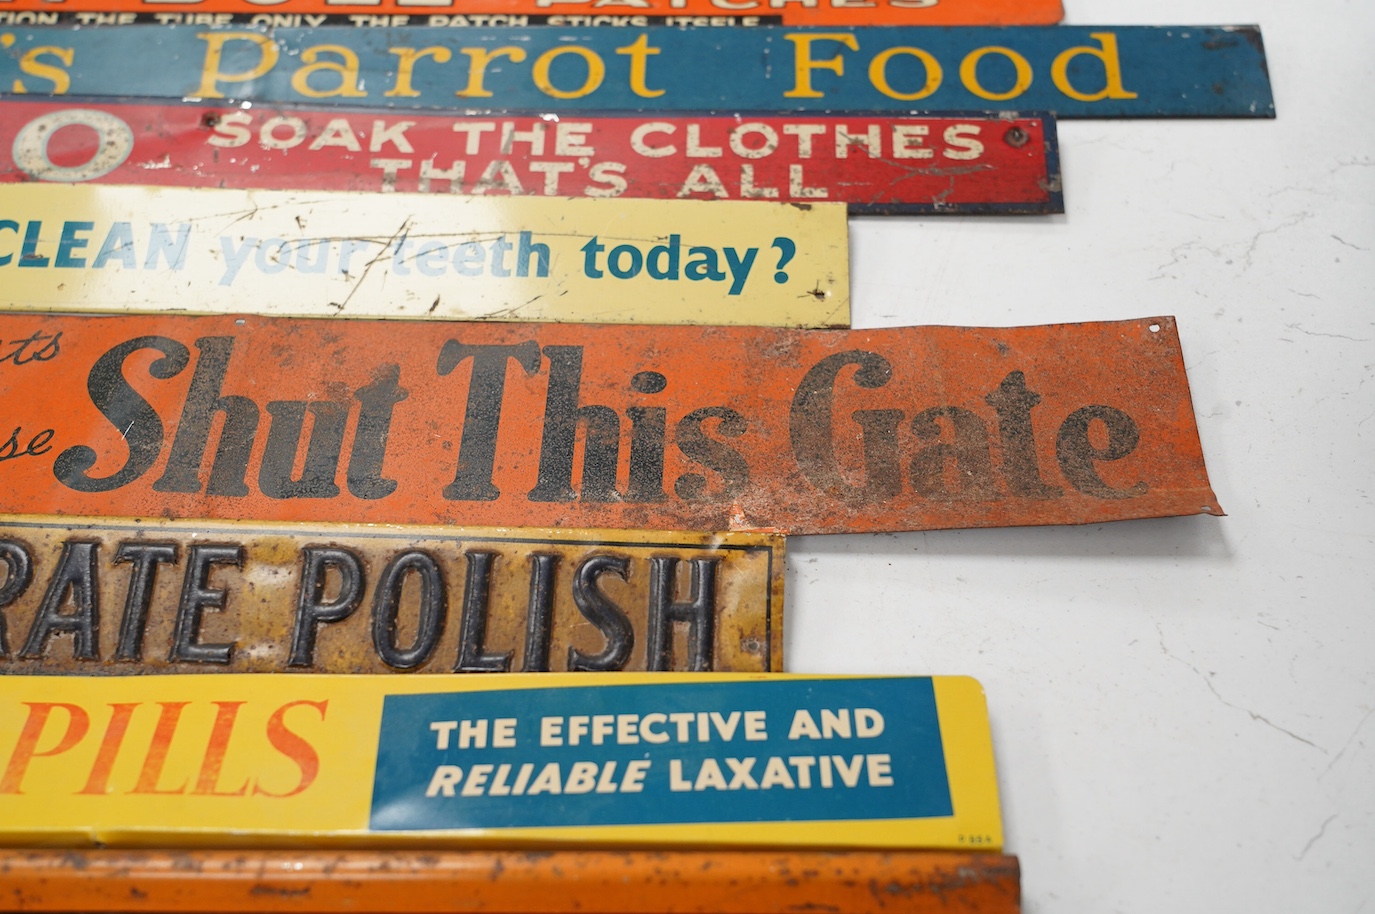 Eleven early / mid century tinplate advertising shelf strips, largest 60cm. Condition - poor to fair